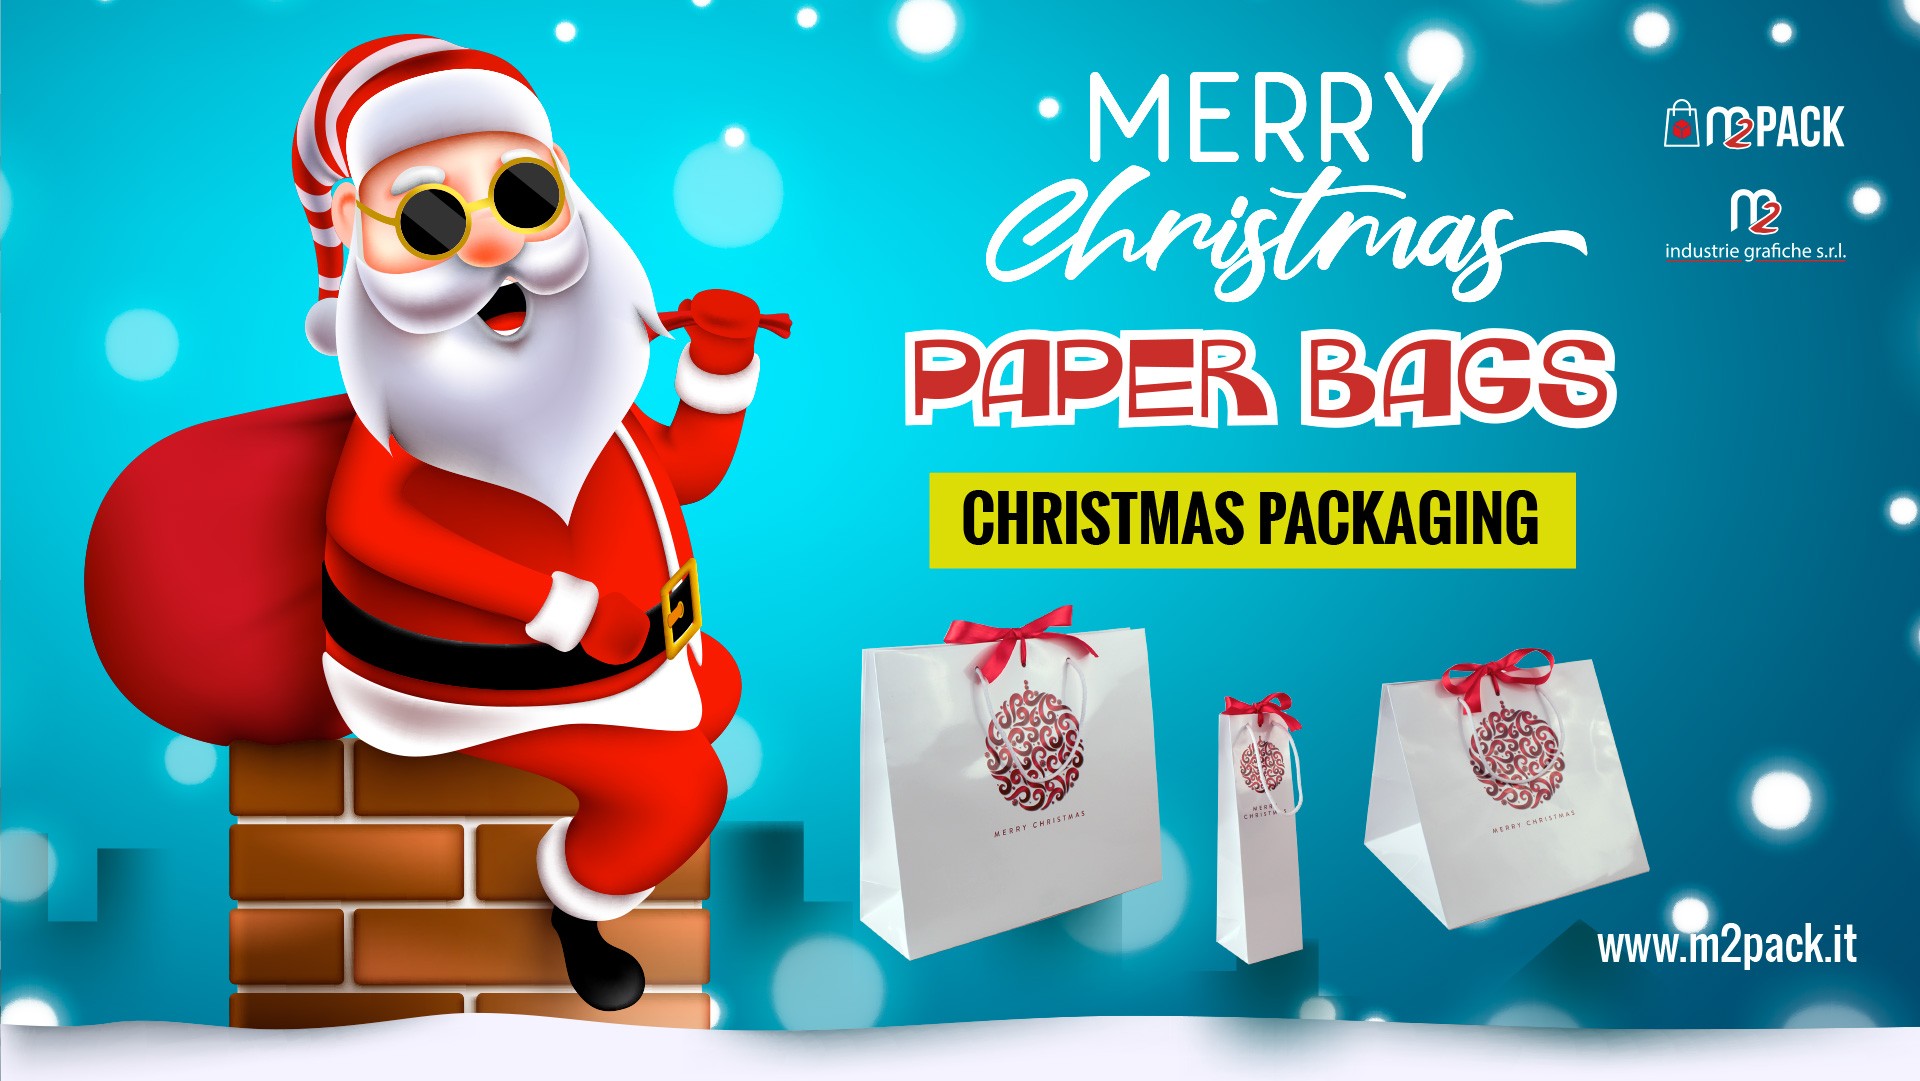 MERRY CHRISTMAS PAPER BAGS